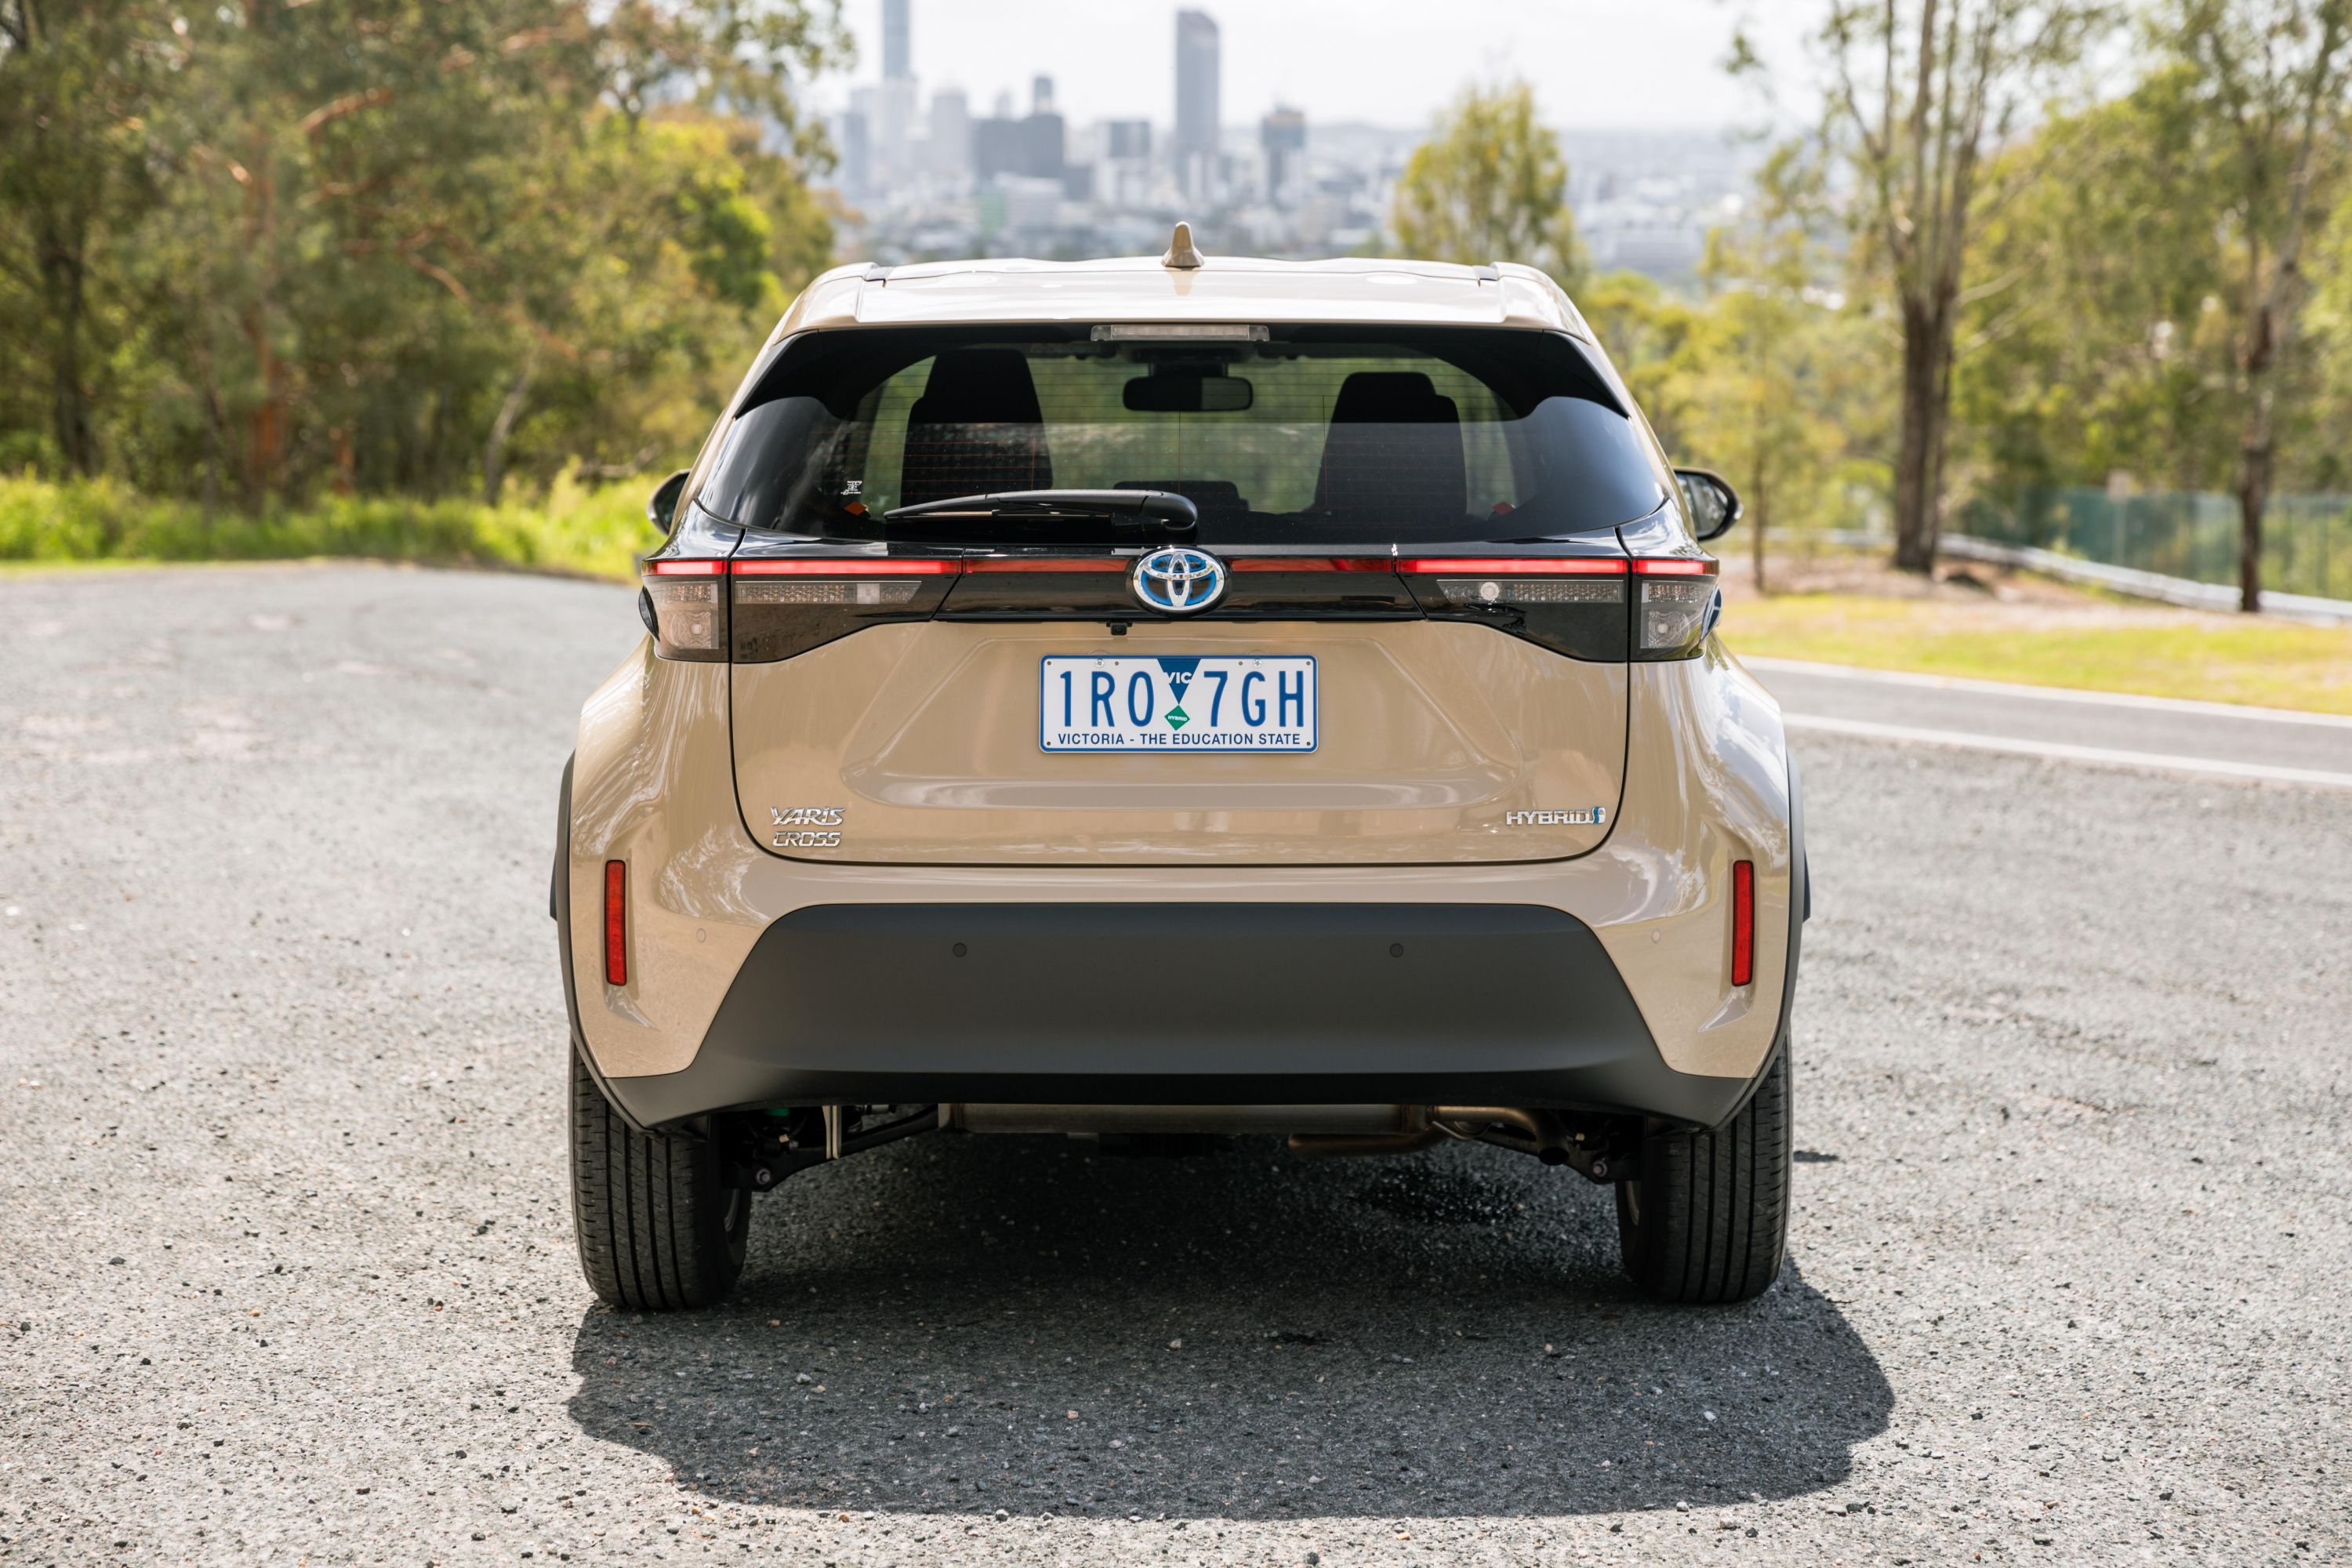 New Toyota Yaris Cross Hybrid Back picture, Rear view photo and